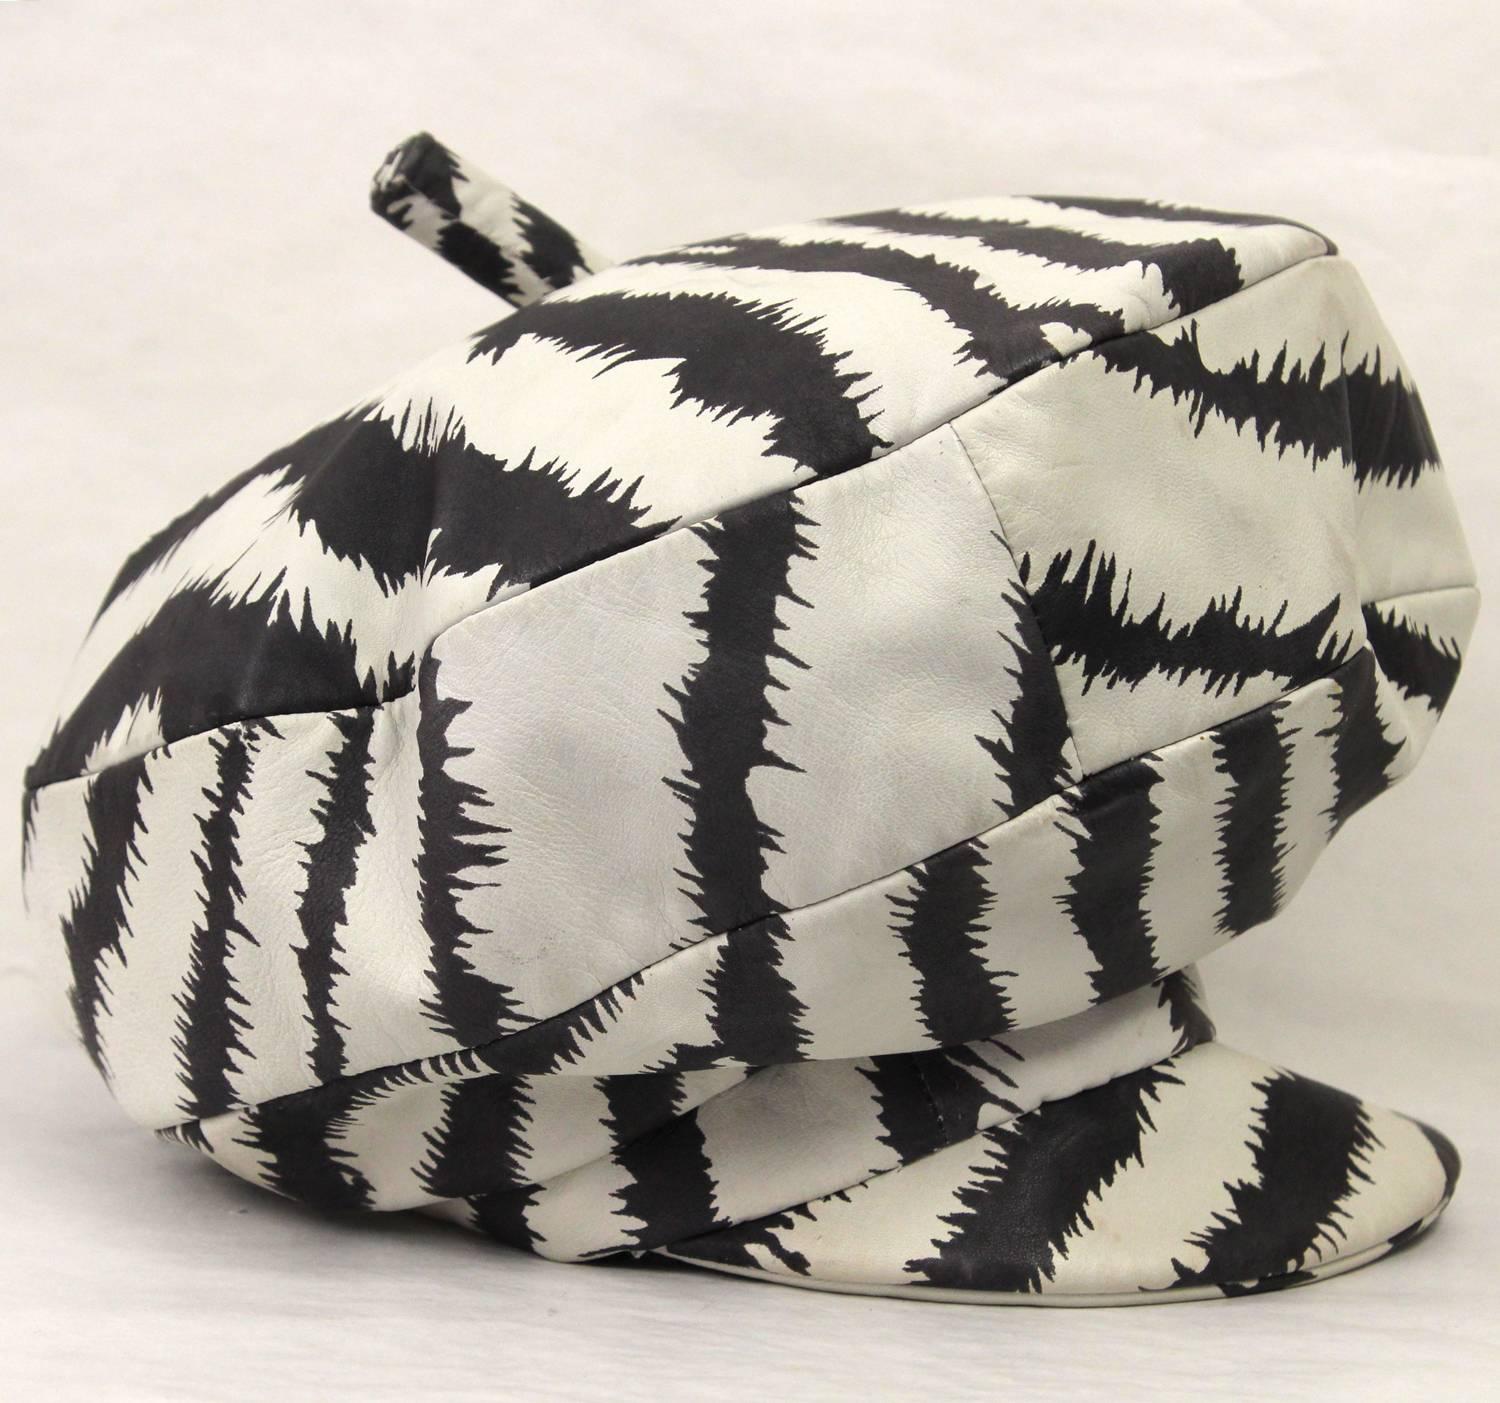 Super fun zebra-striped hat from Italian atelier Isotta Zerri. Very unusual and unique with its wide visor. Made of extremely soft leather with black and white pattern. Good conditions.

Measurements:
Total diameter: 22 cm
Head hole diameter: 18 cm